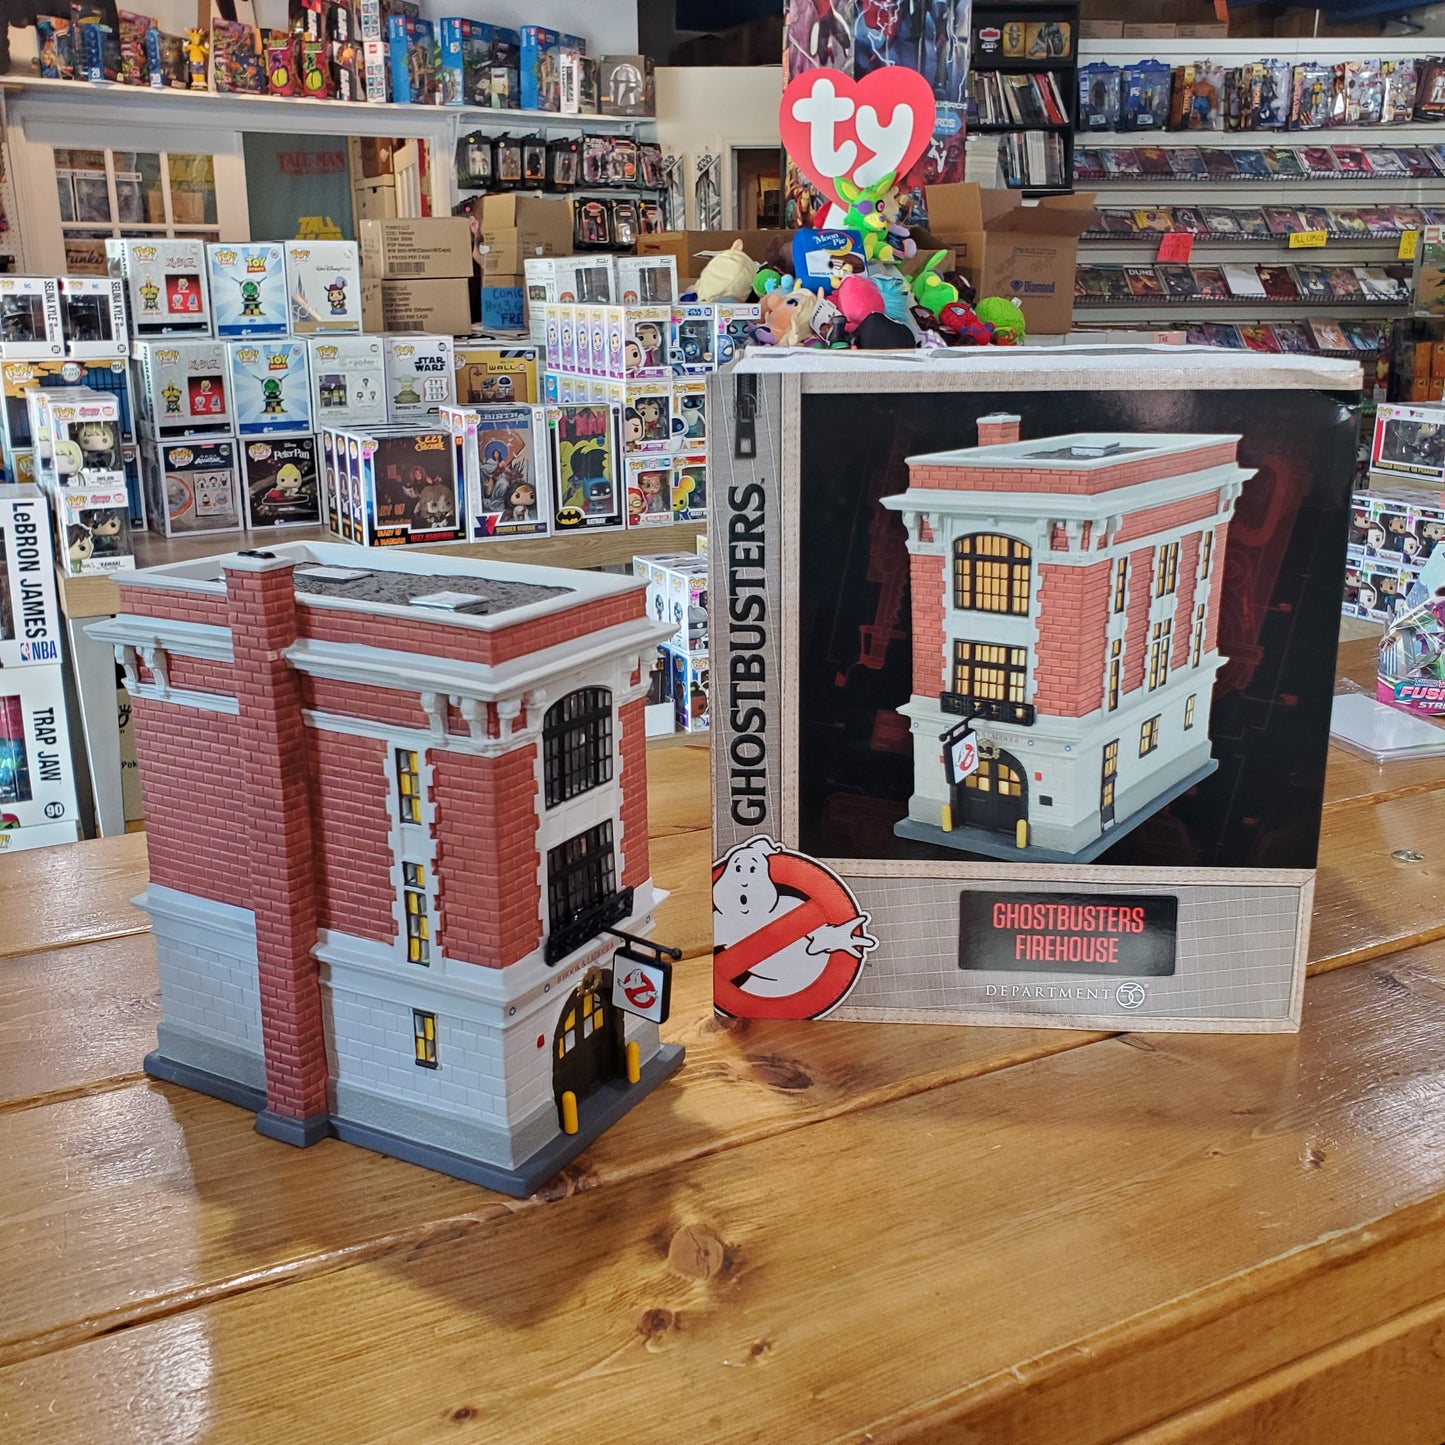 Ghostbusters Firehouse by Department 56